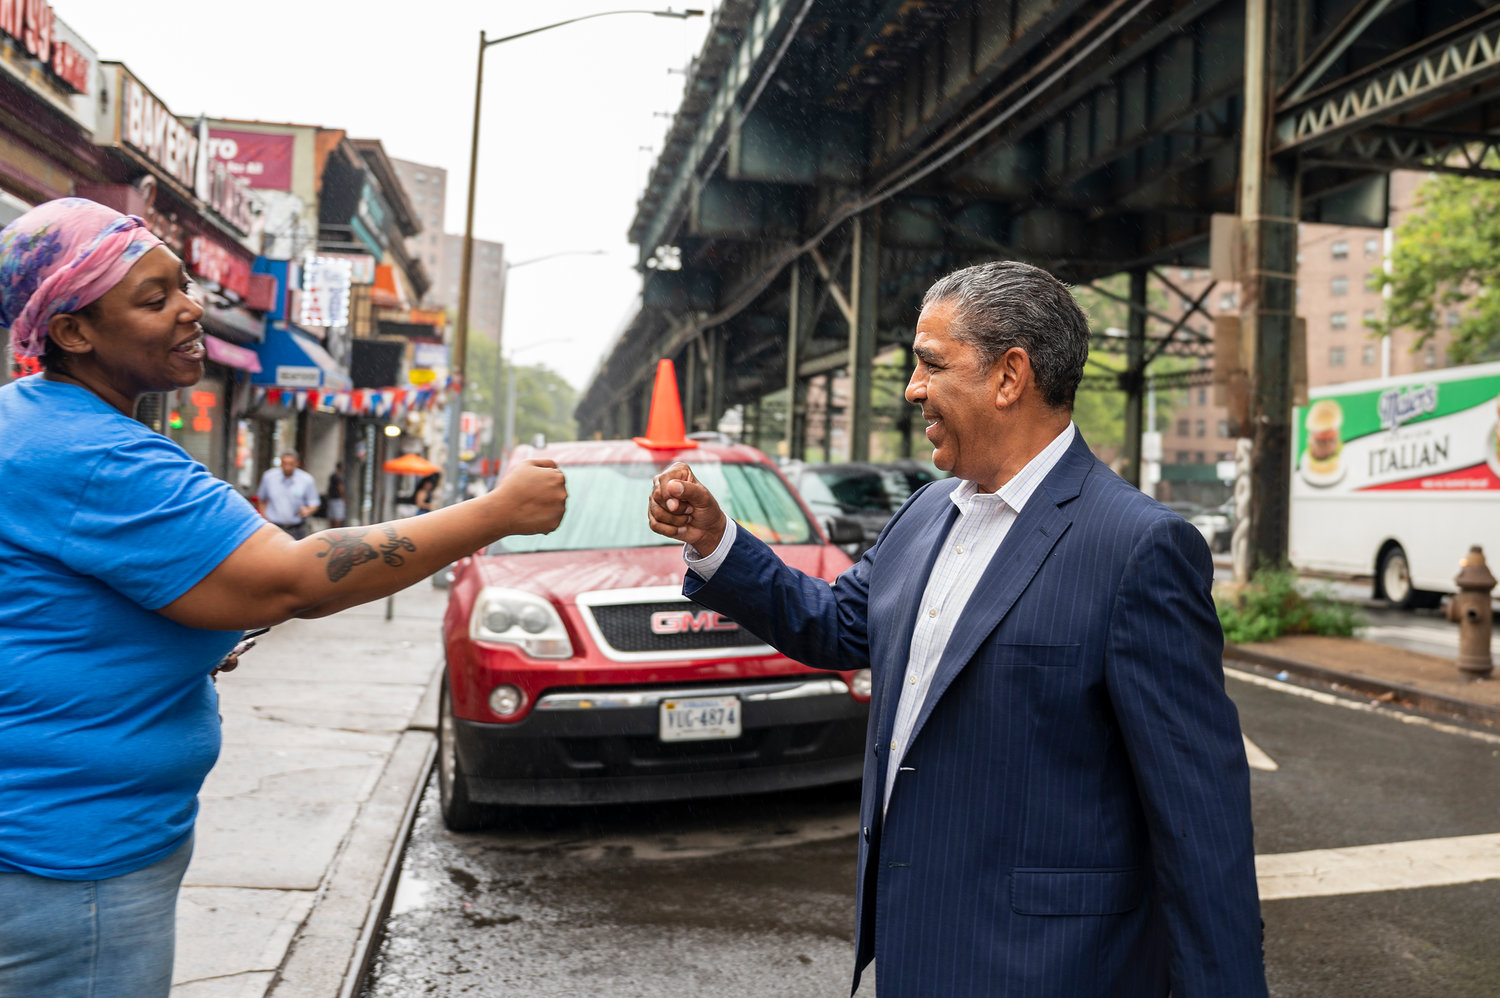 U.S. Rep. Adriano Espaillat visits with some of his constituents in Marble Hill last week, as he campaigns to make yet another return trip to Washington.